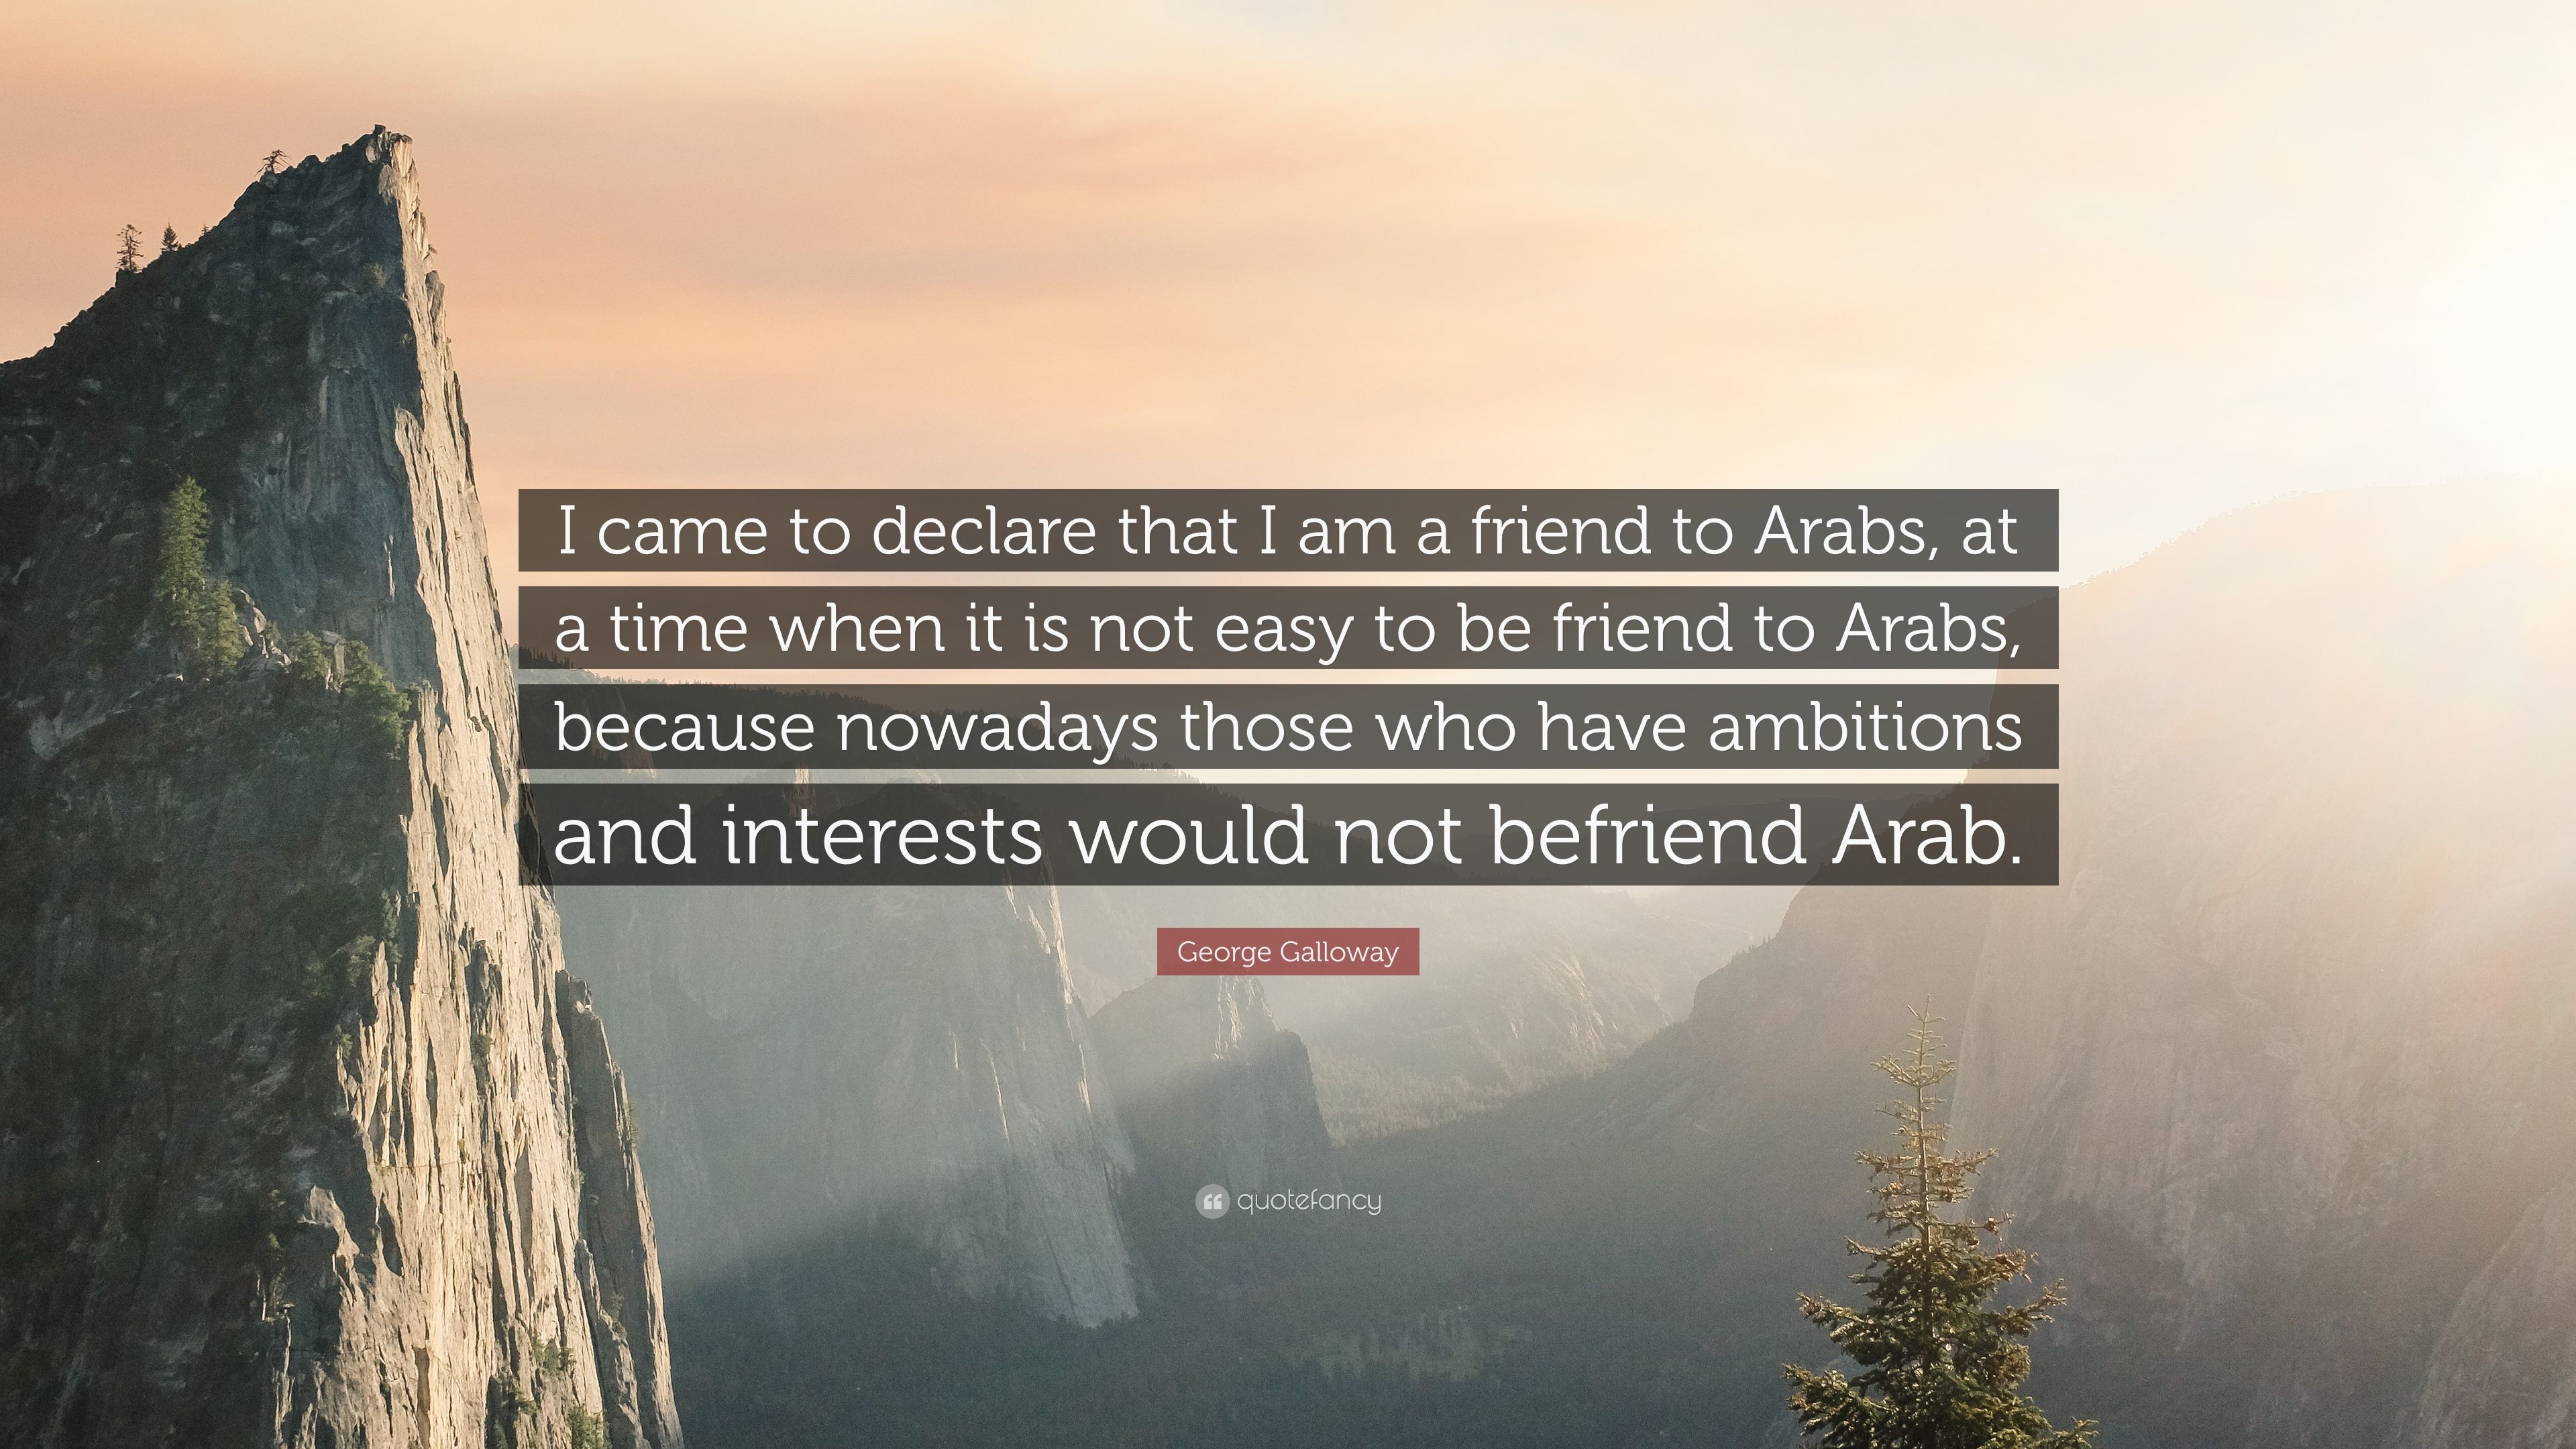 George Galloway Quote: “I came to declare that I am a friend to Arabs, at a time when it is not easy to be friend to Arabs, because nowadays tho.” (7 wallpaper)